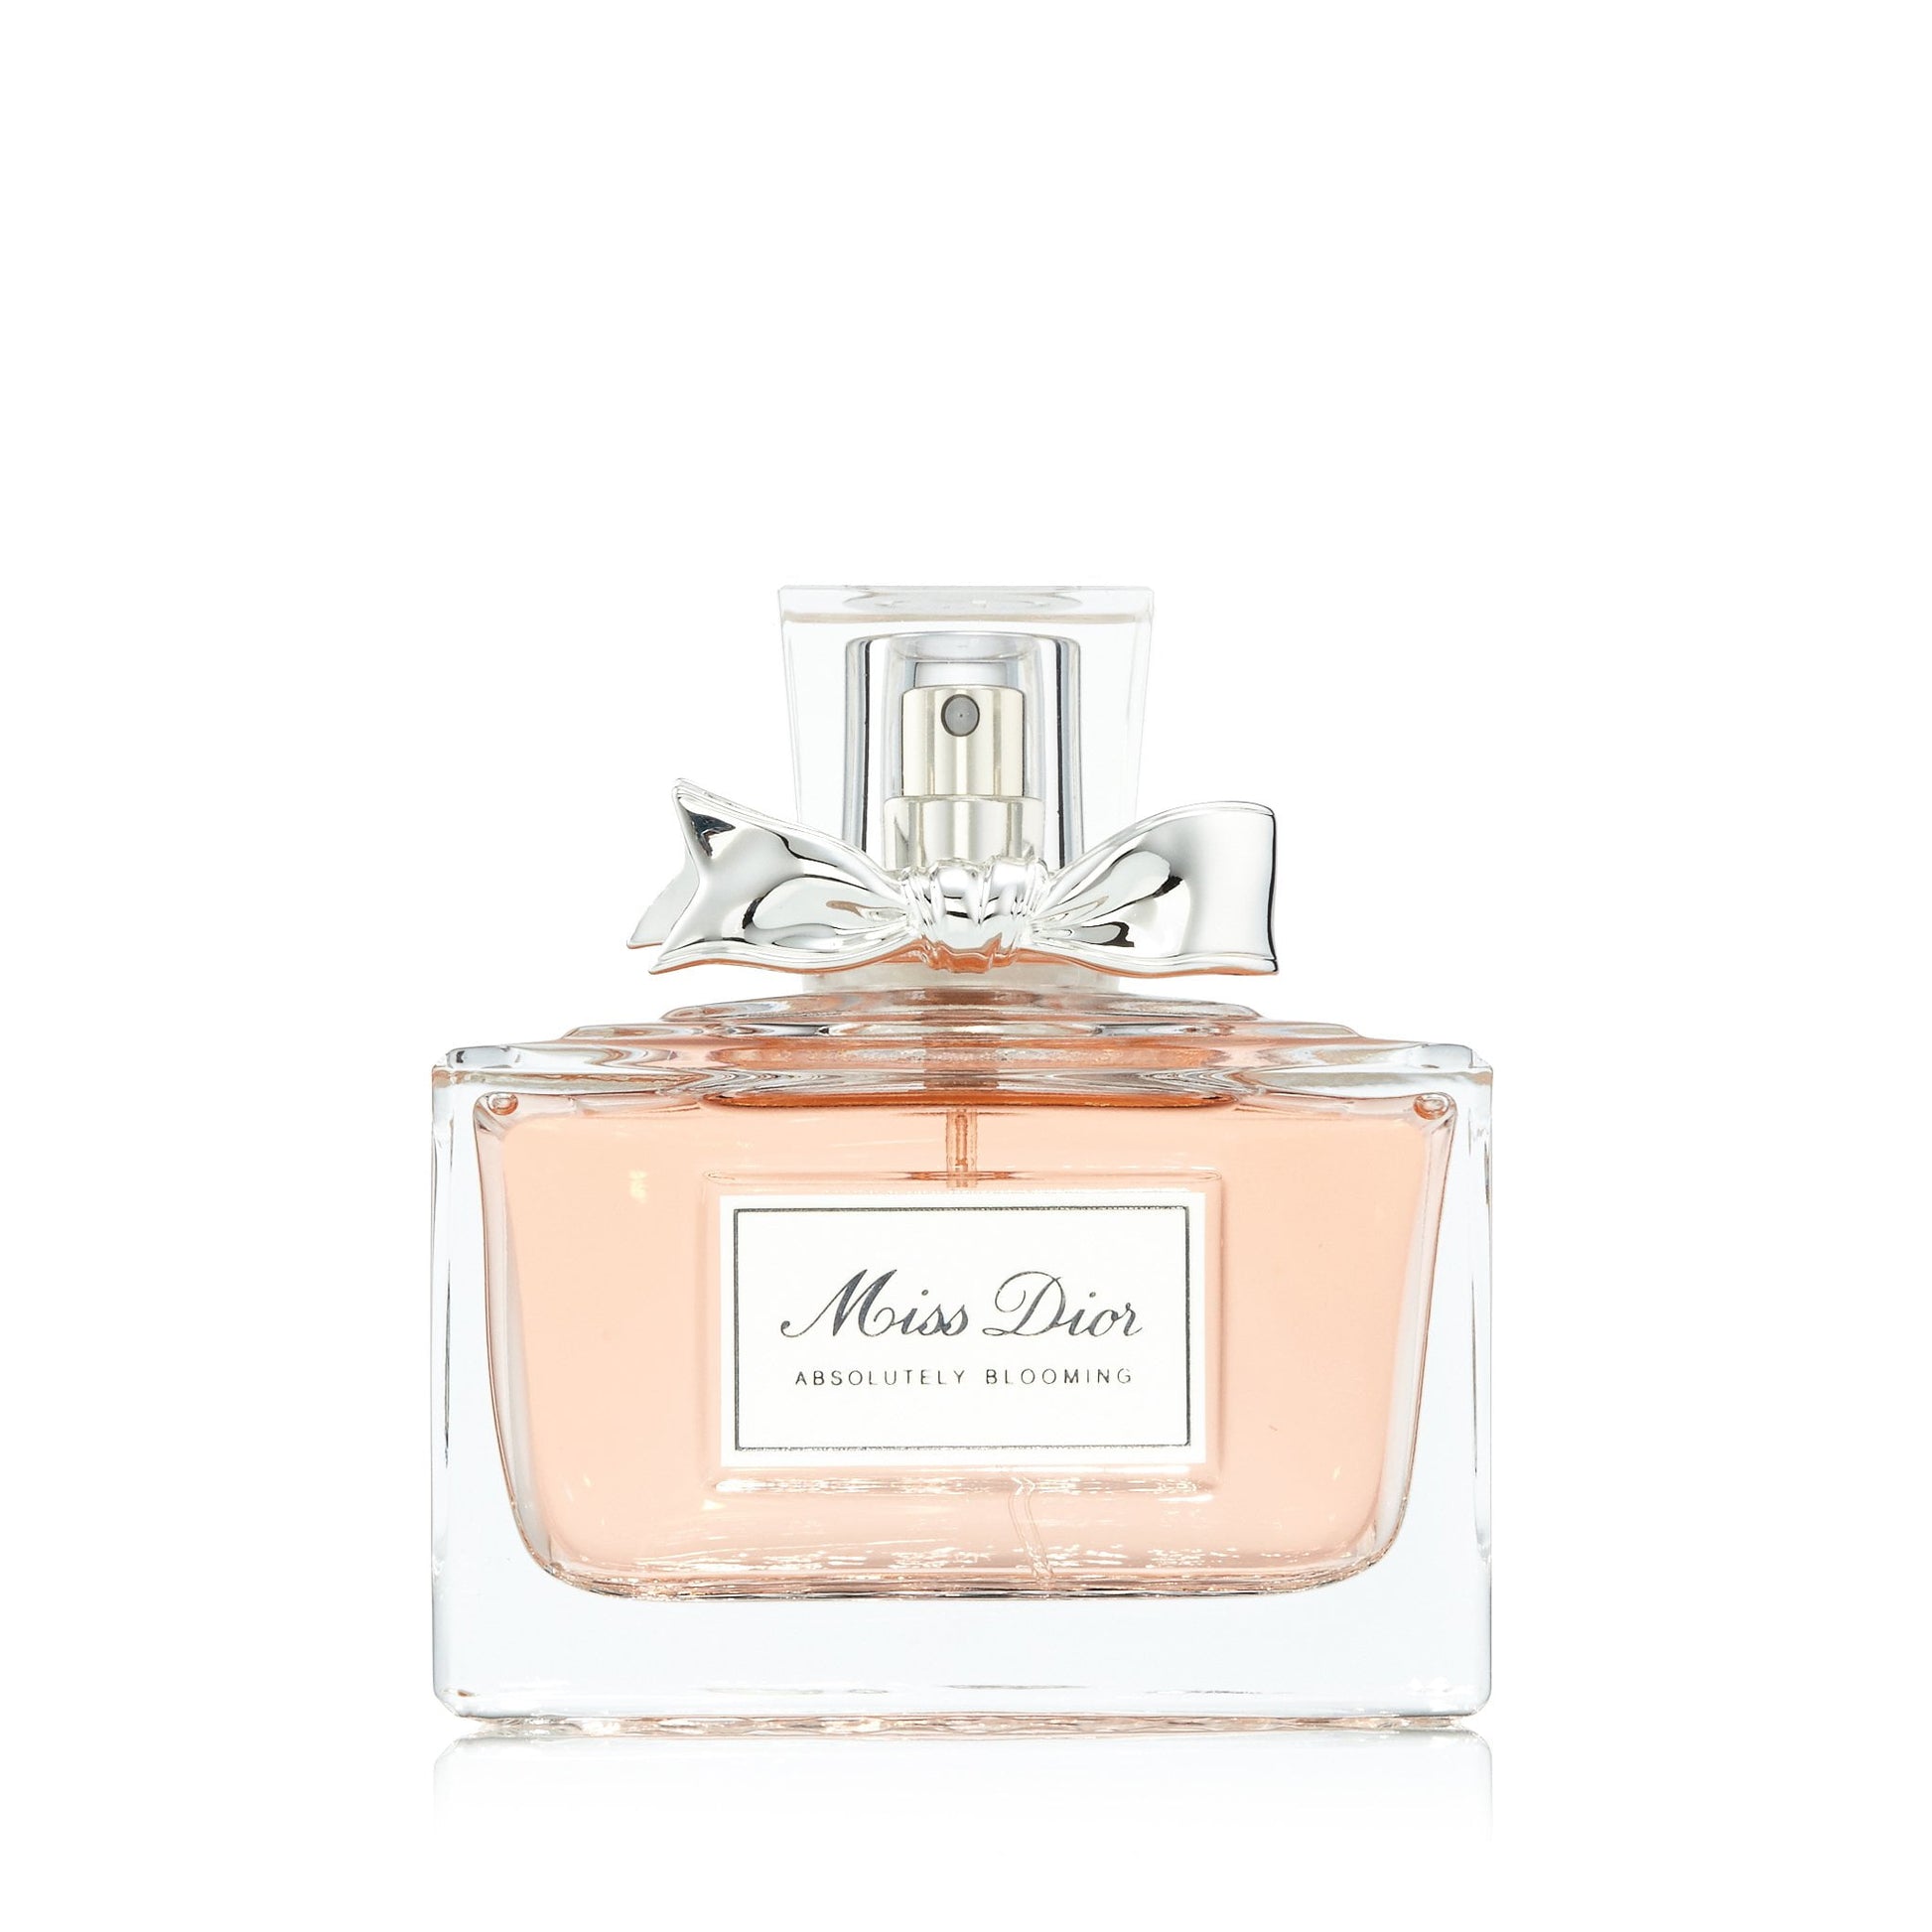 MISS DIOR ABSOLUTELY BLOOMING FOR WOMEN - EAU DE PARFUM SPRAY, 3.4 OZ –  Fragrance Room